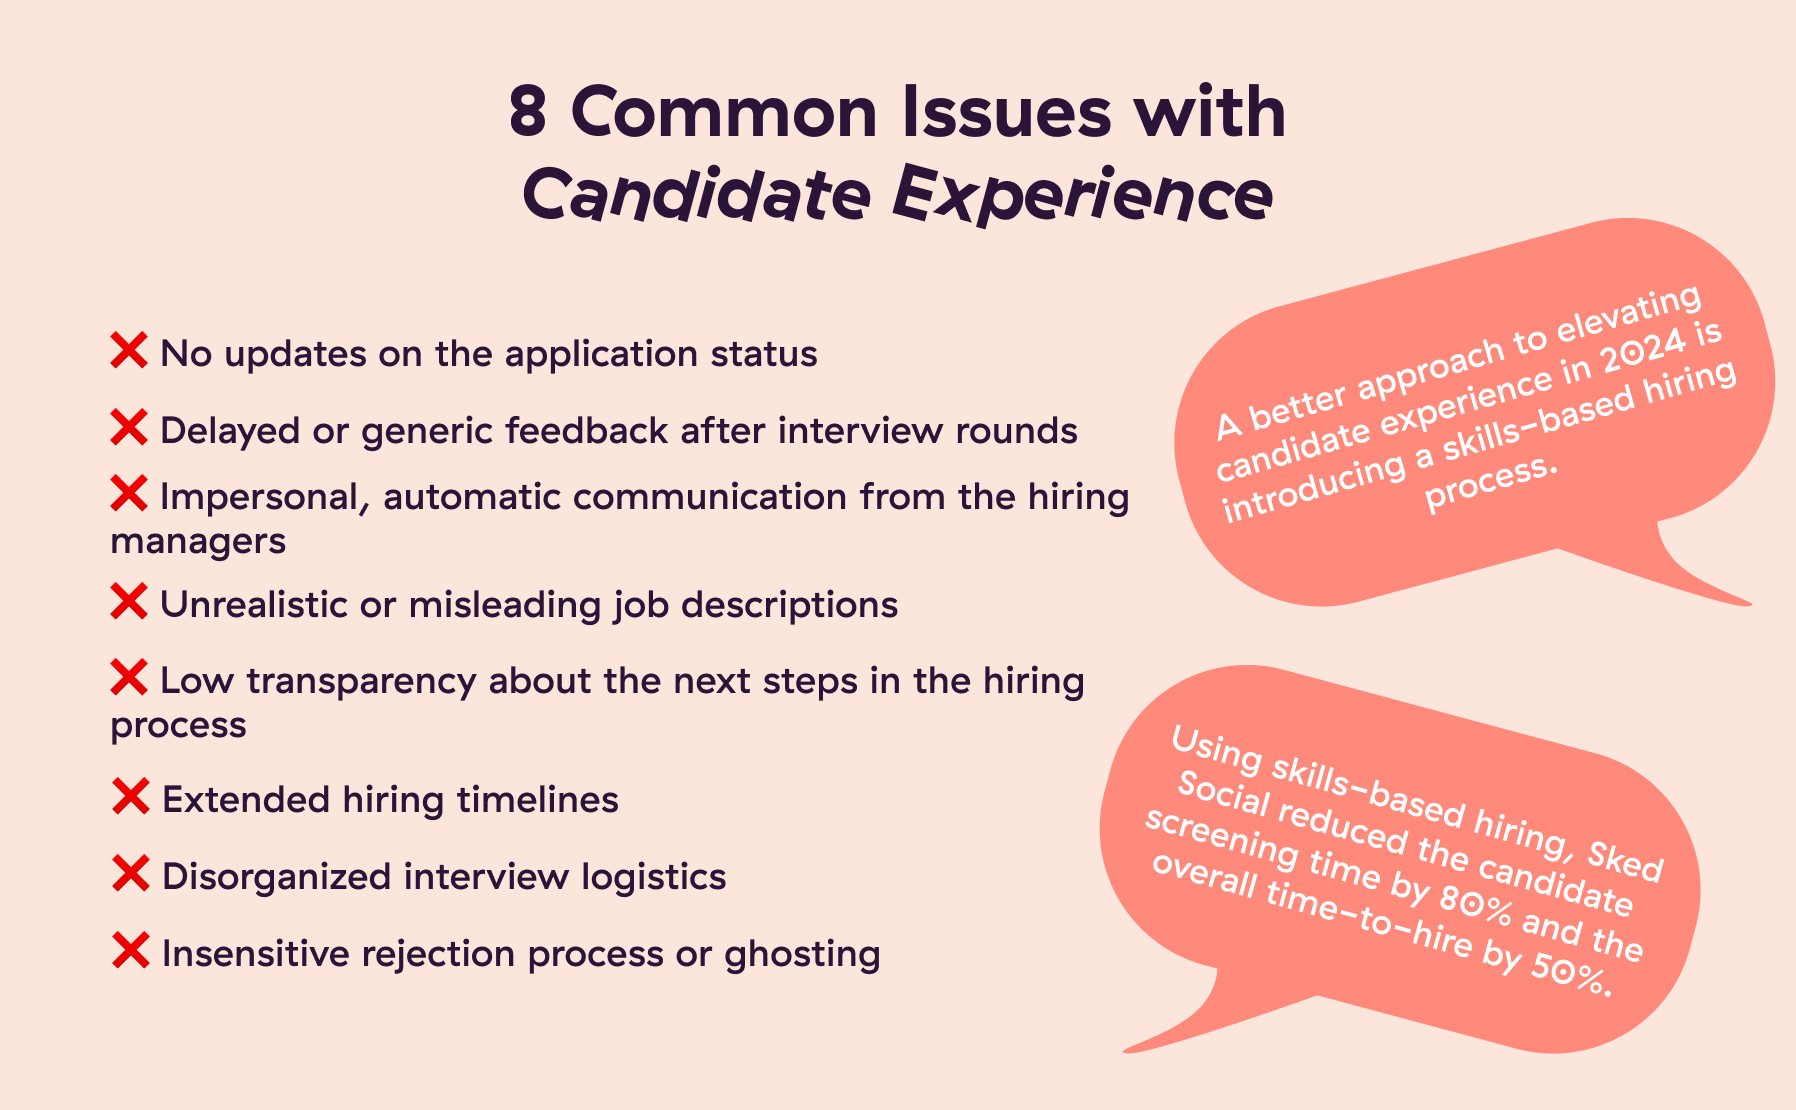 Understanding the common issues that drive poor candidate experience can help you avoid them.